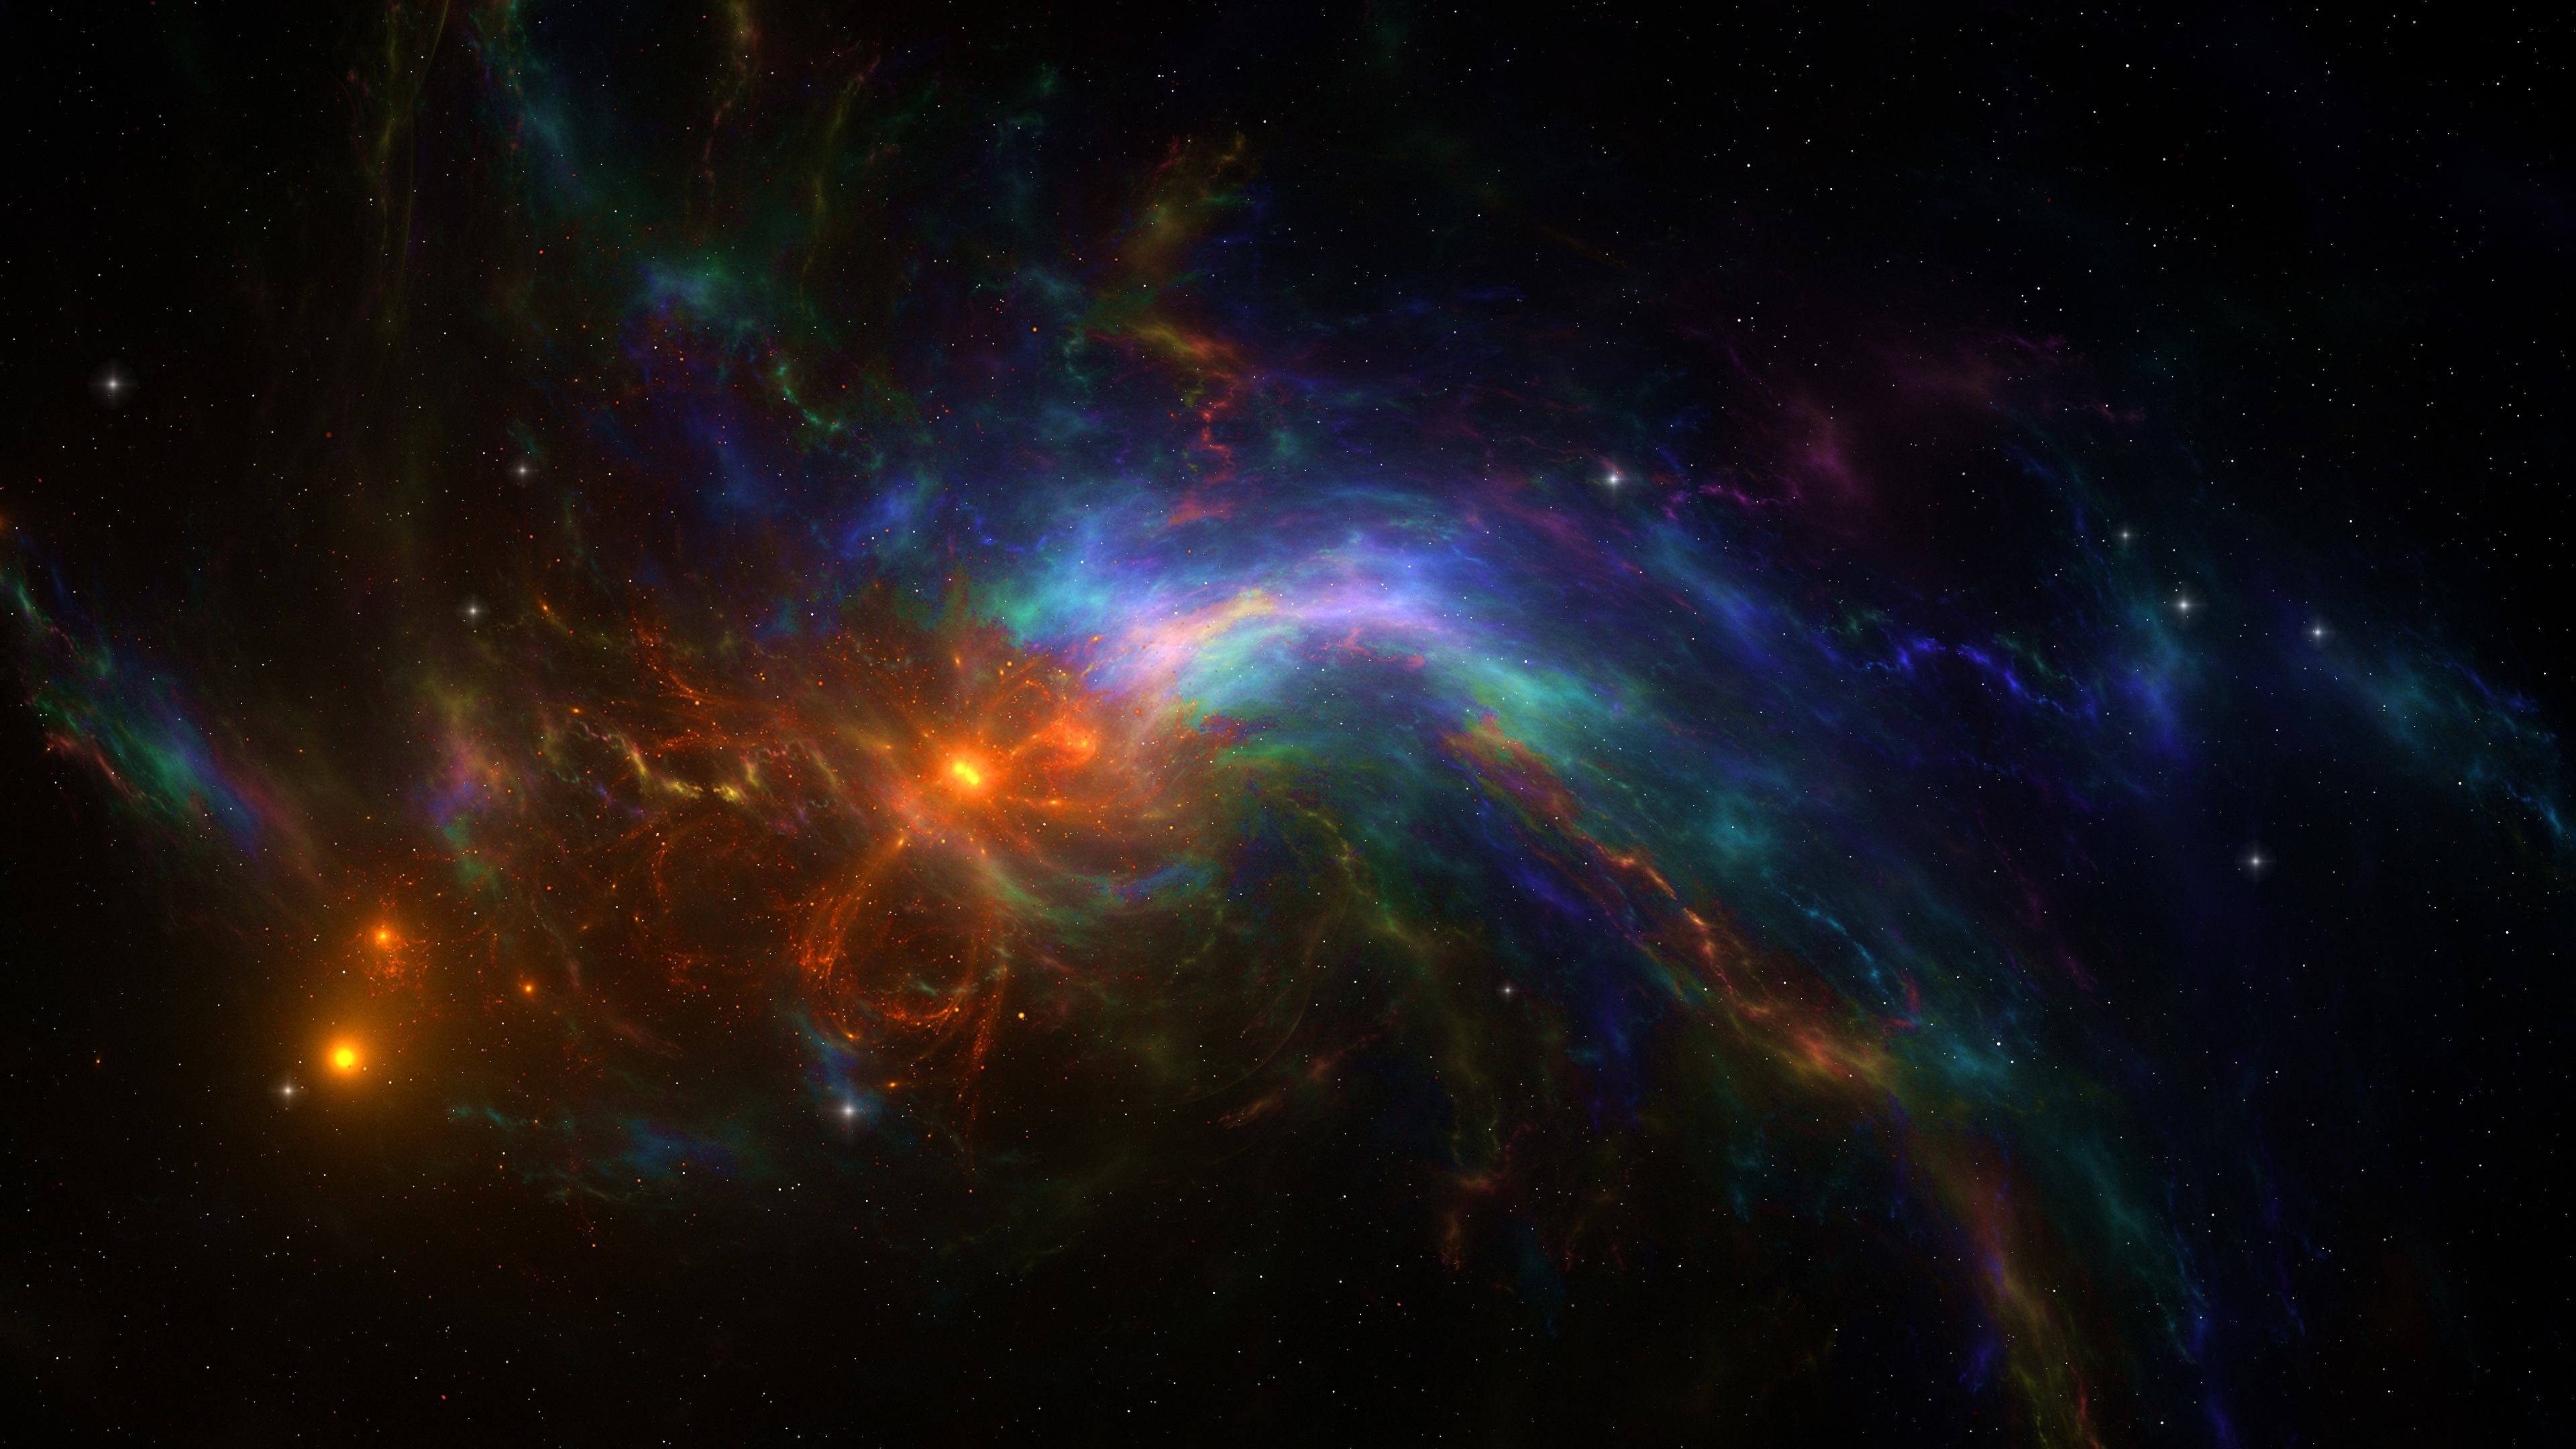 Colorful wild fire, Cosmic beauty, Abstract art, Captivating visuals, 3840x2160 4K Desktop